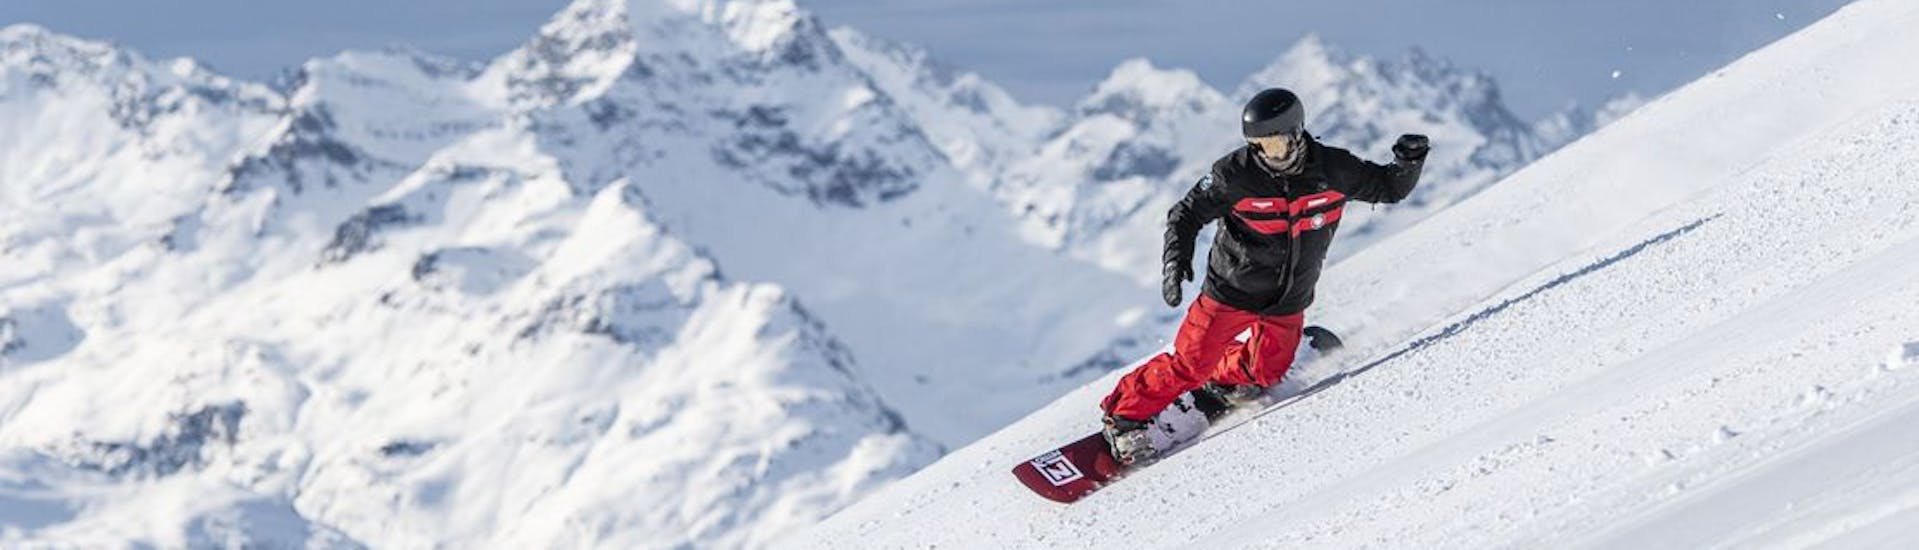 A snowboarder is going down the slopes of St. Moritz during private snowboarding for kids and adults of all levels with Swiss Ski School St. Moritz The Red Legends.